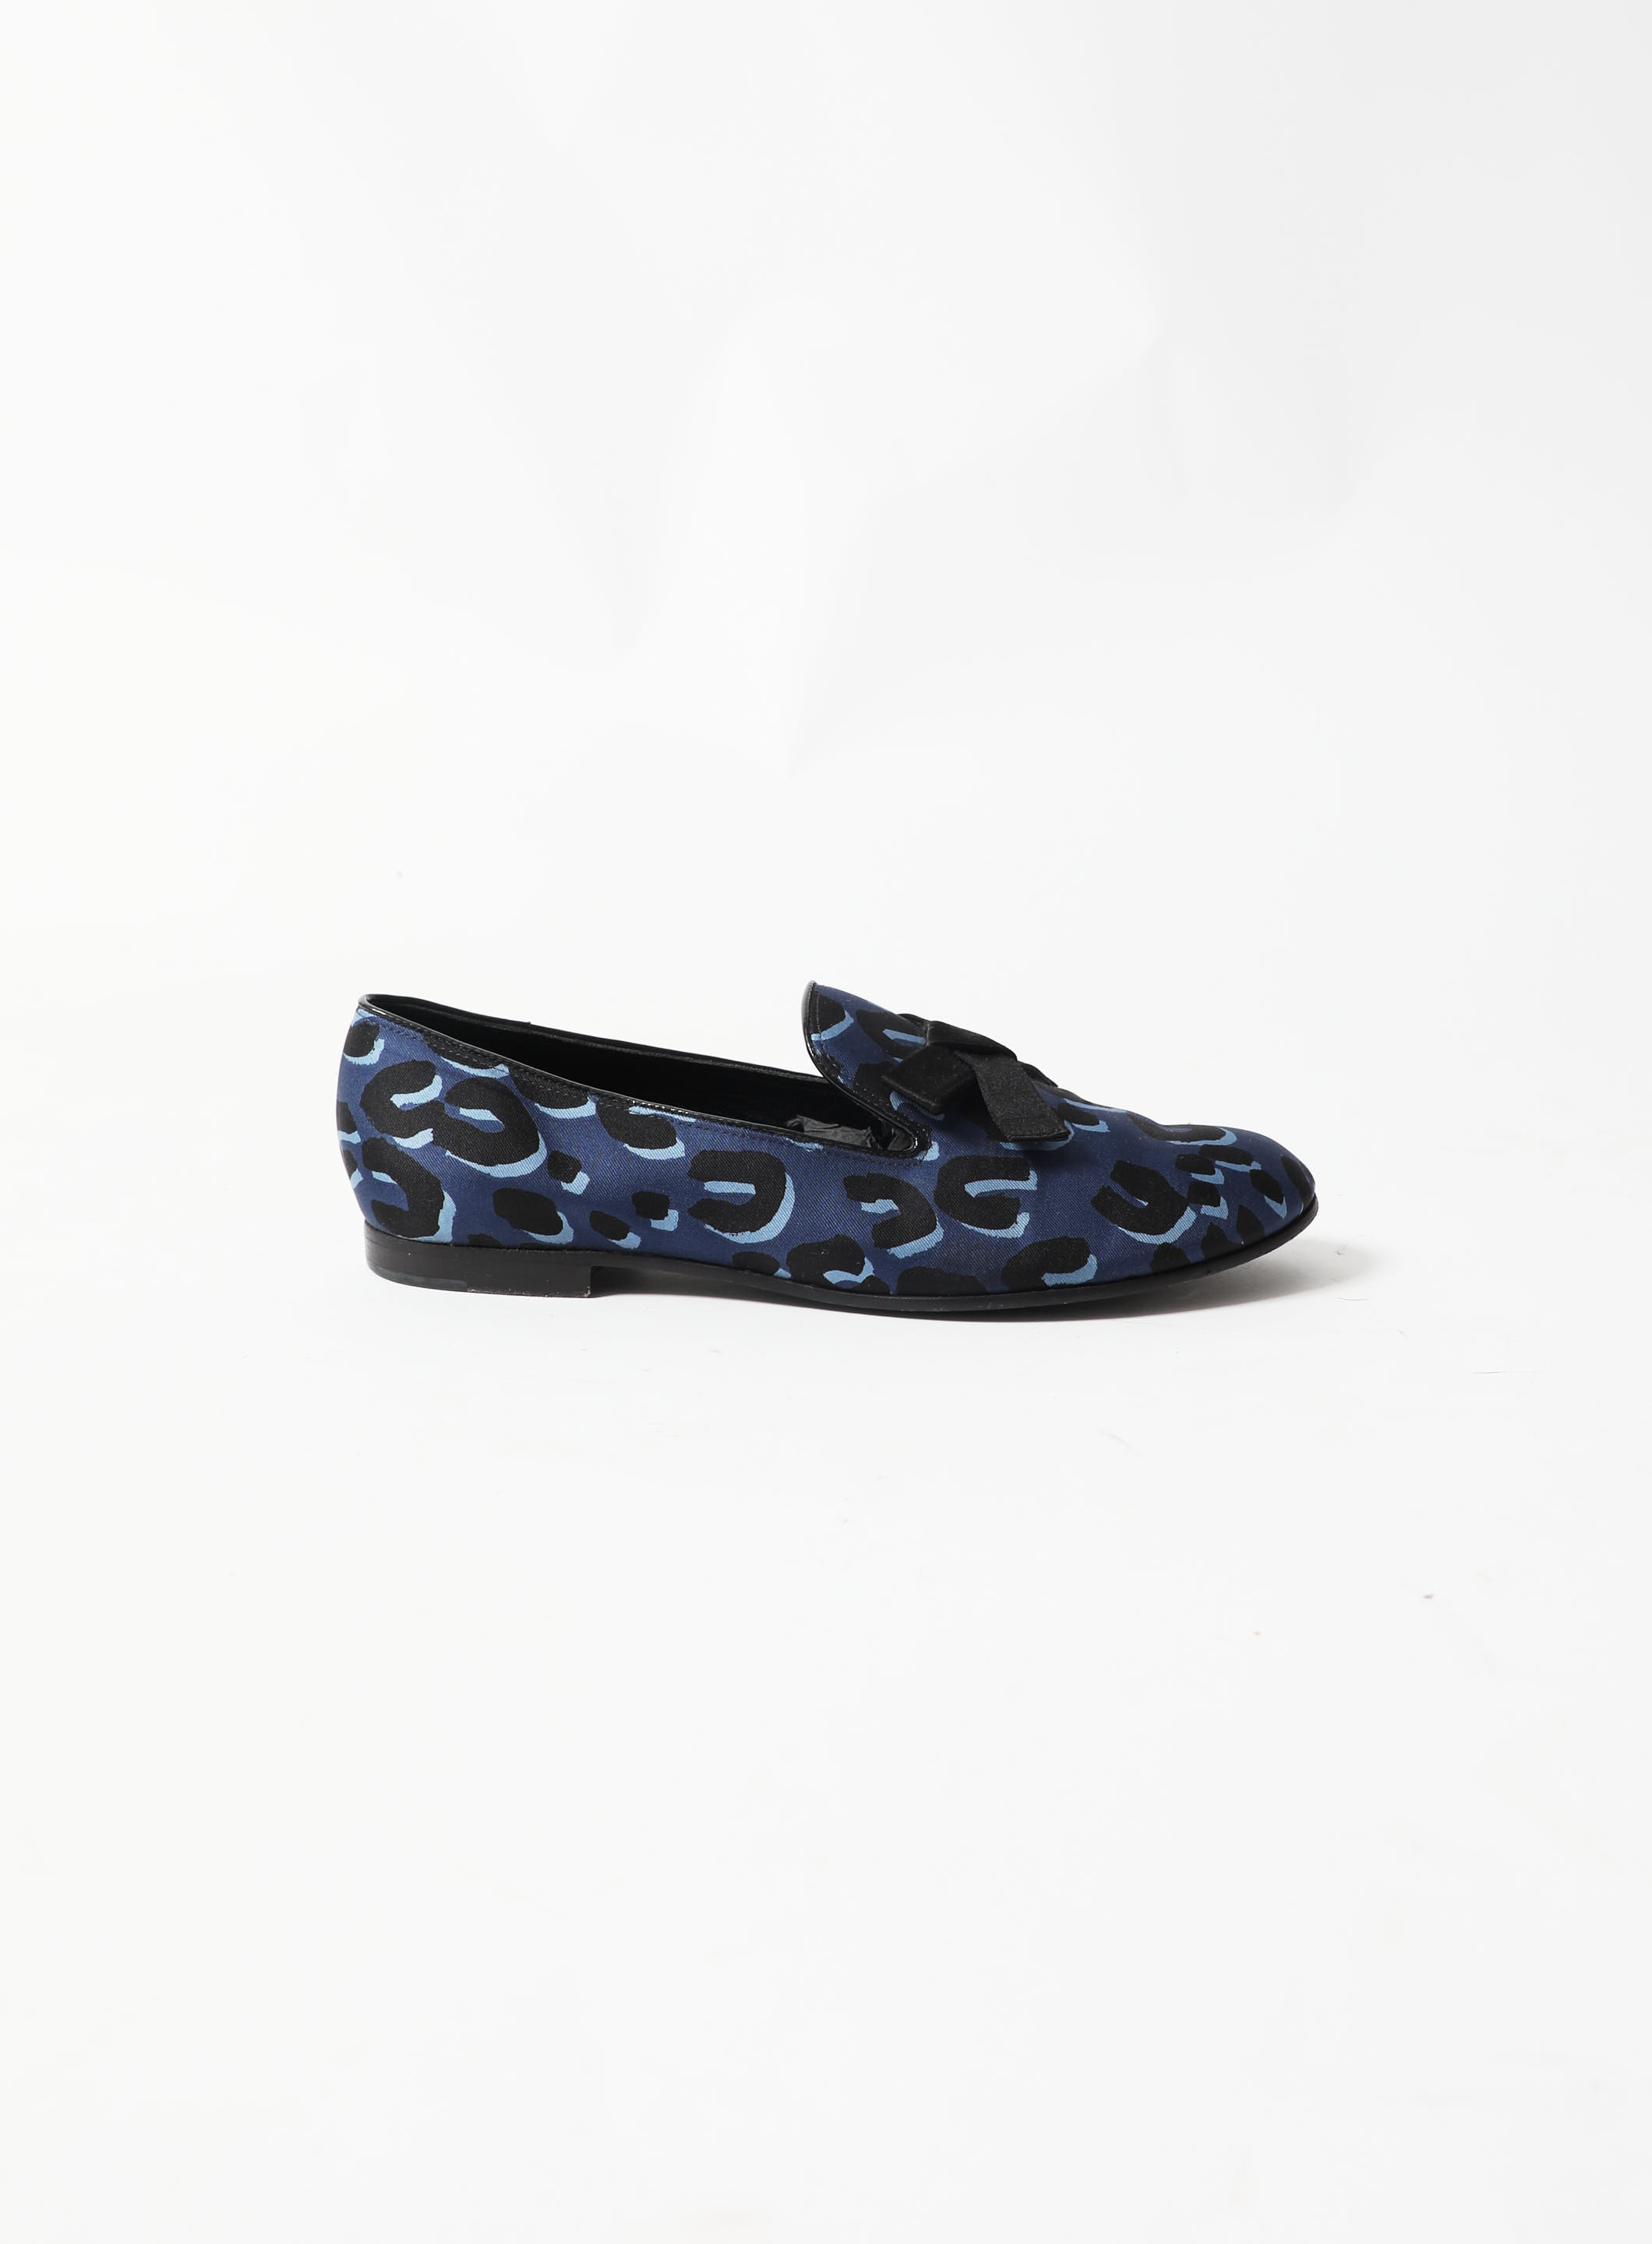 LV Baroque Loafers